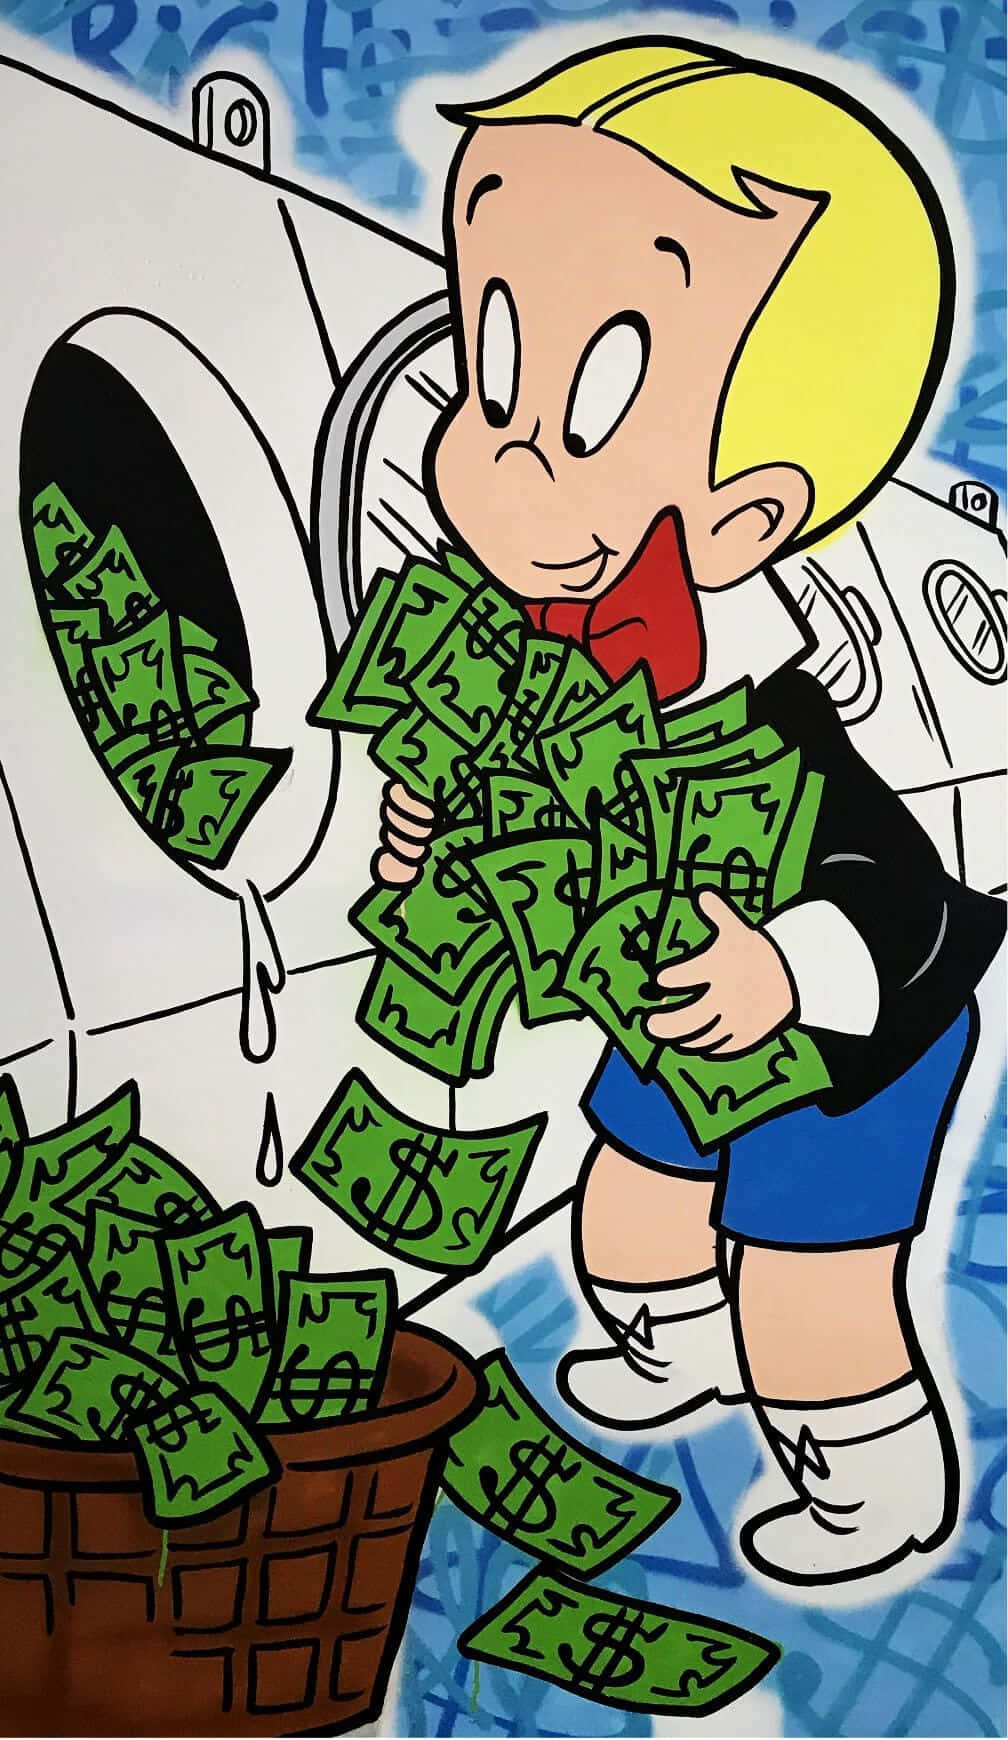 A Cartoon Of A Boy With Money In His Pocket